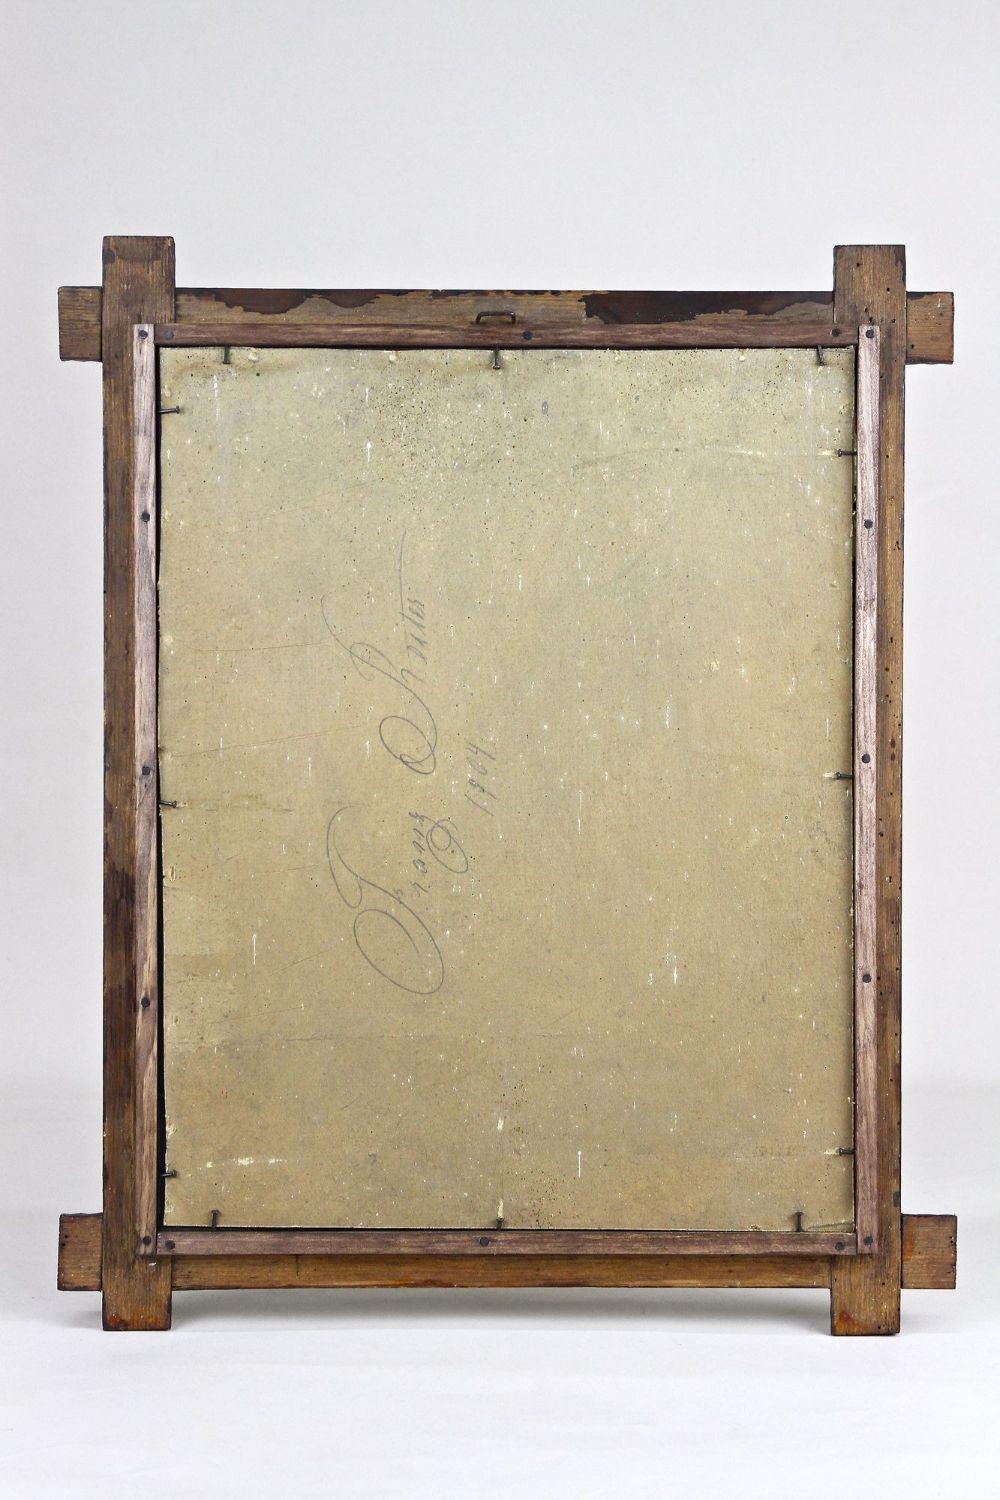 Tramp Art Rustic Wall Mirror With Protruding Corners, Austria ca. 1880 For Sale 10